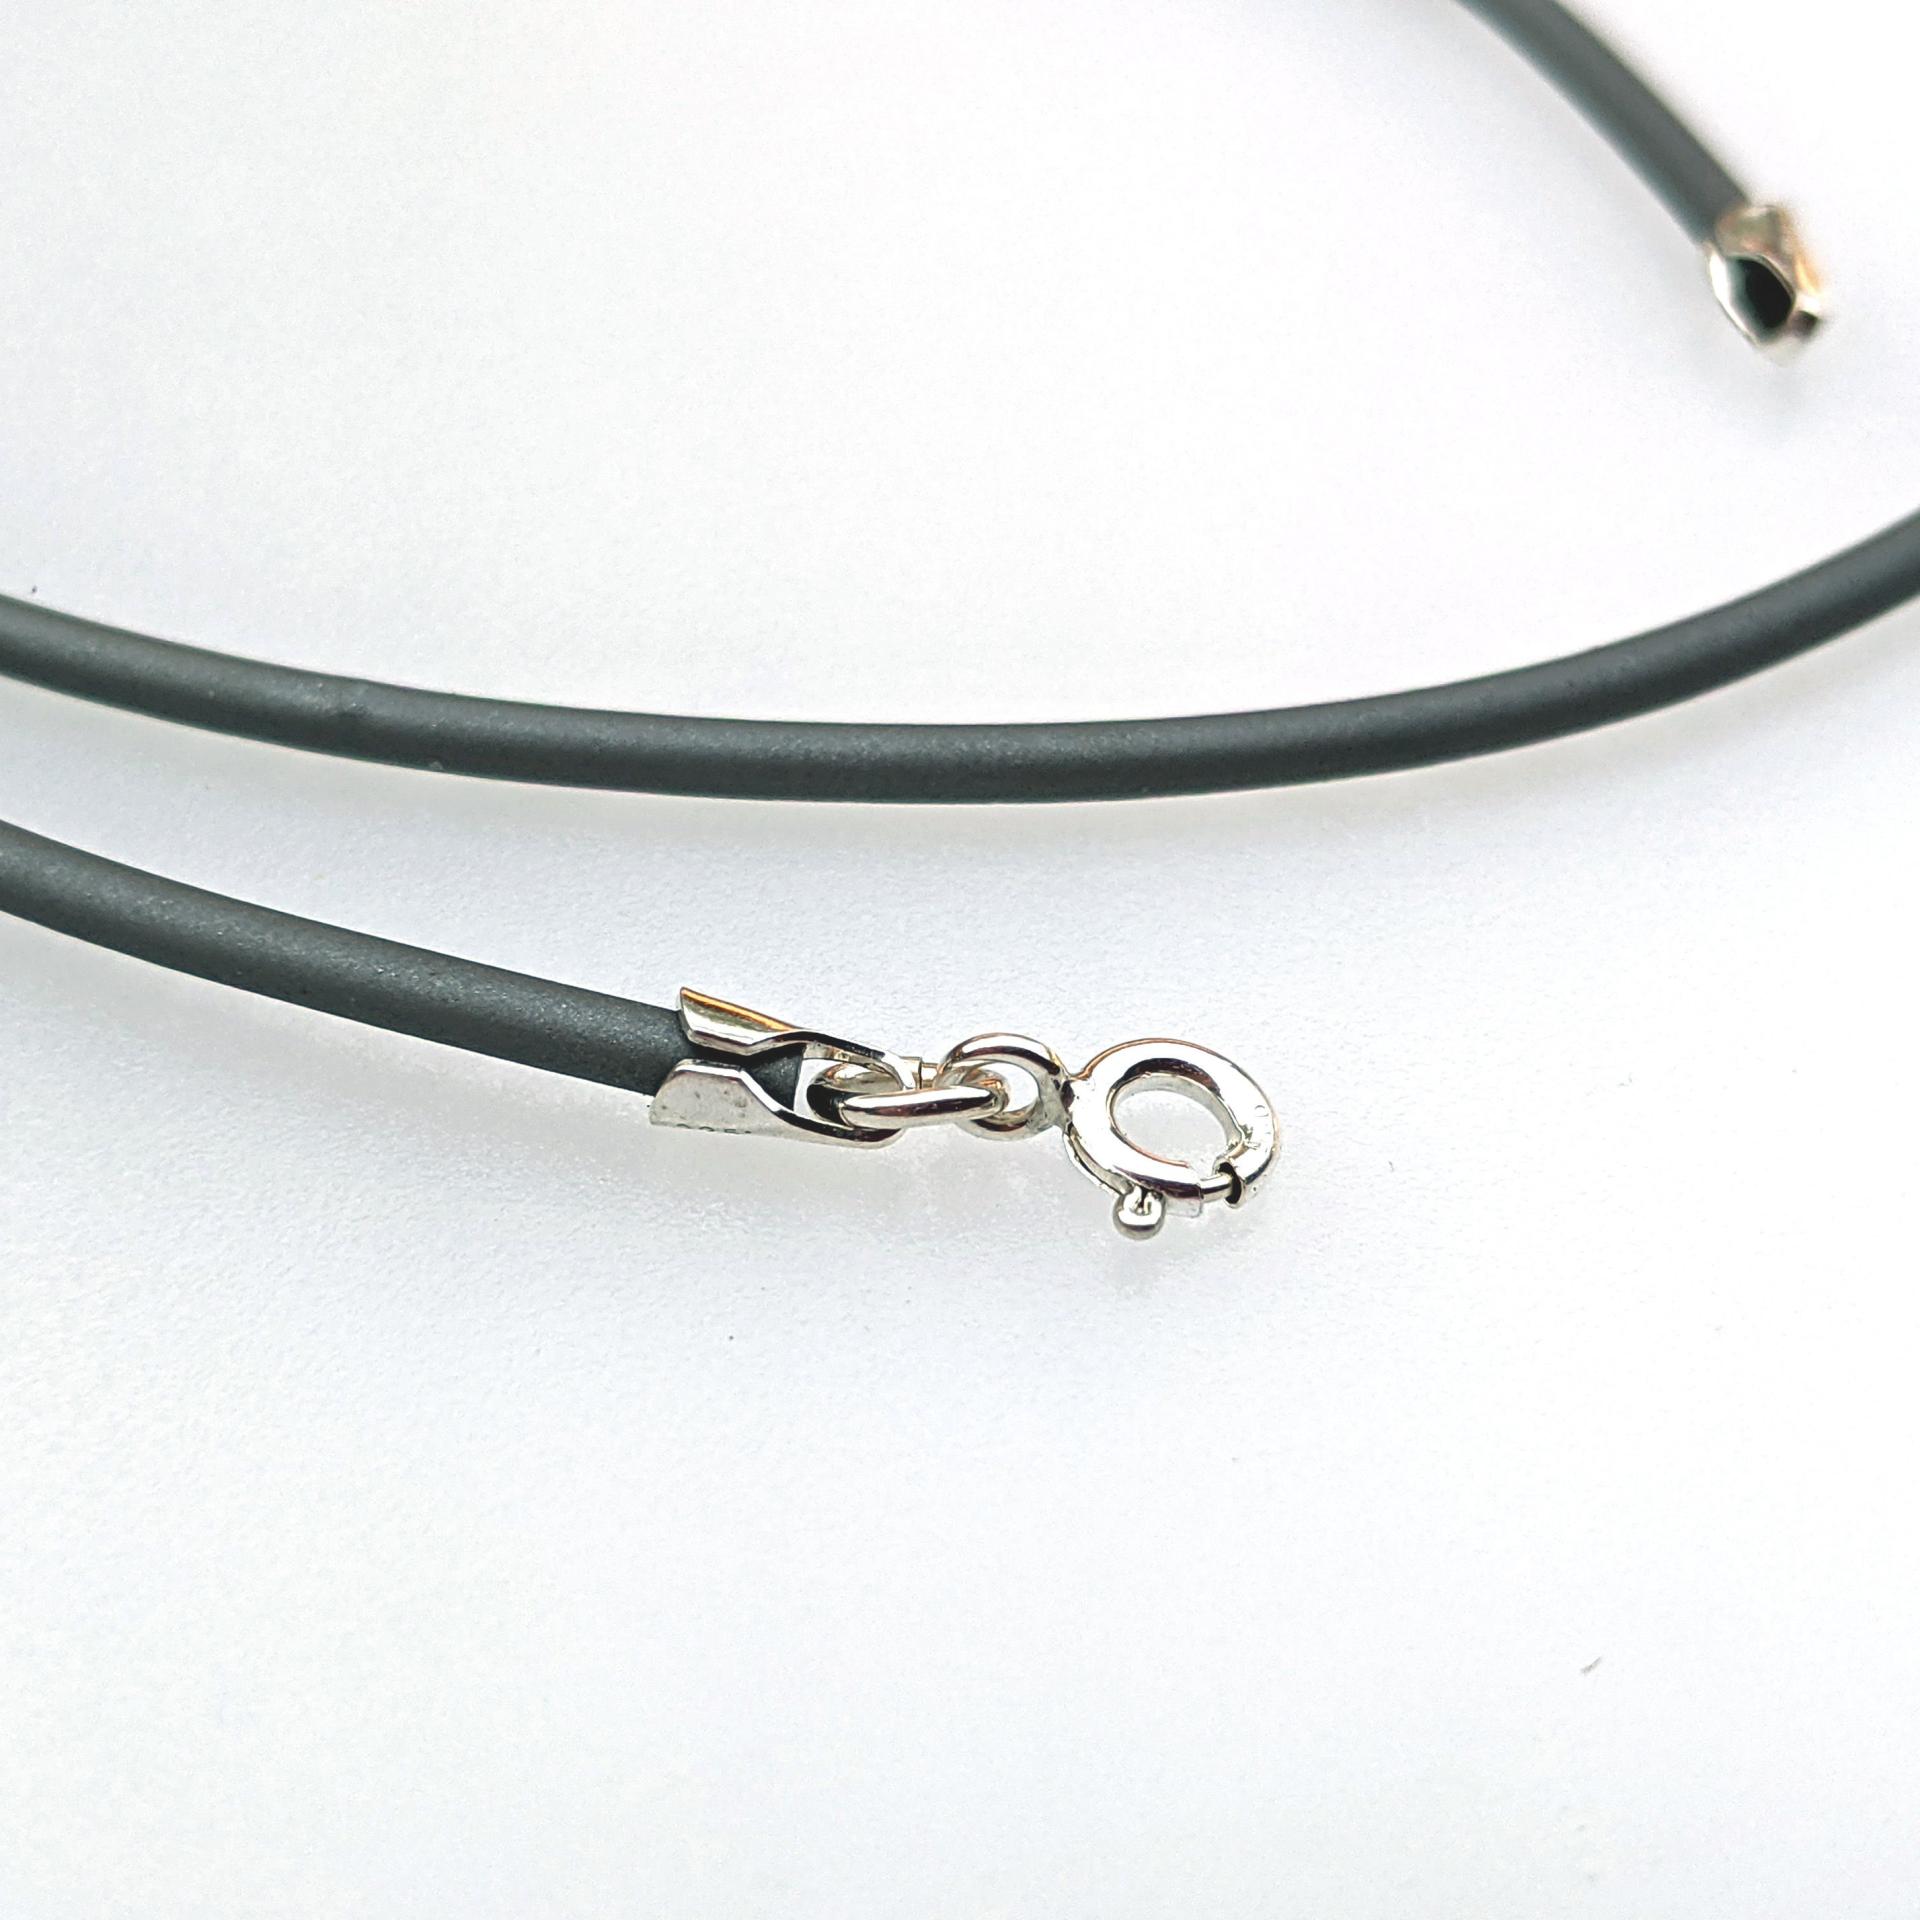 Grey Rubber Cord Necklace, 2mm, Sterling Clasp, Interchangeable, 16", 18", 20", 22", 24"